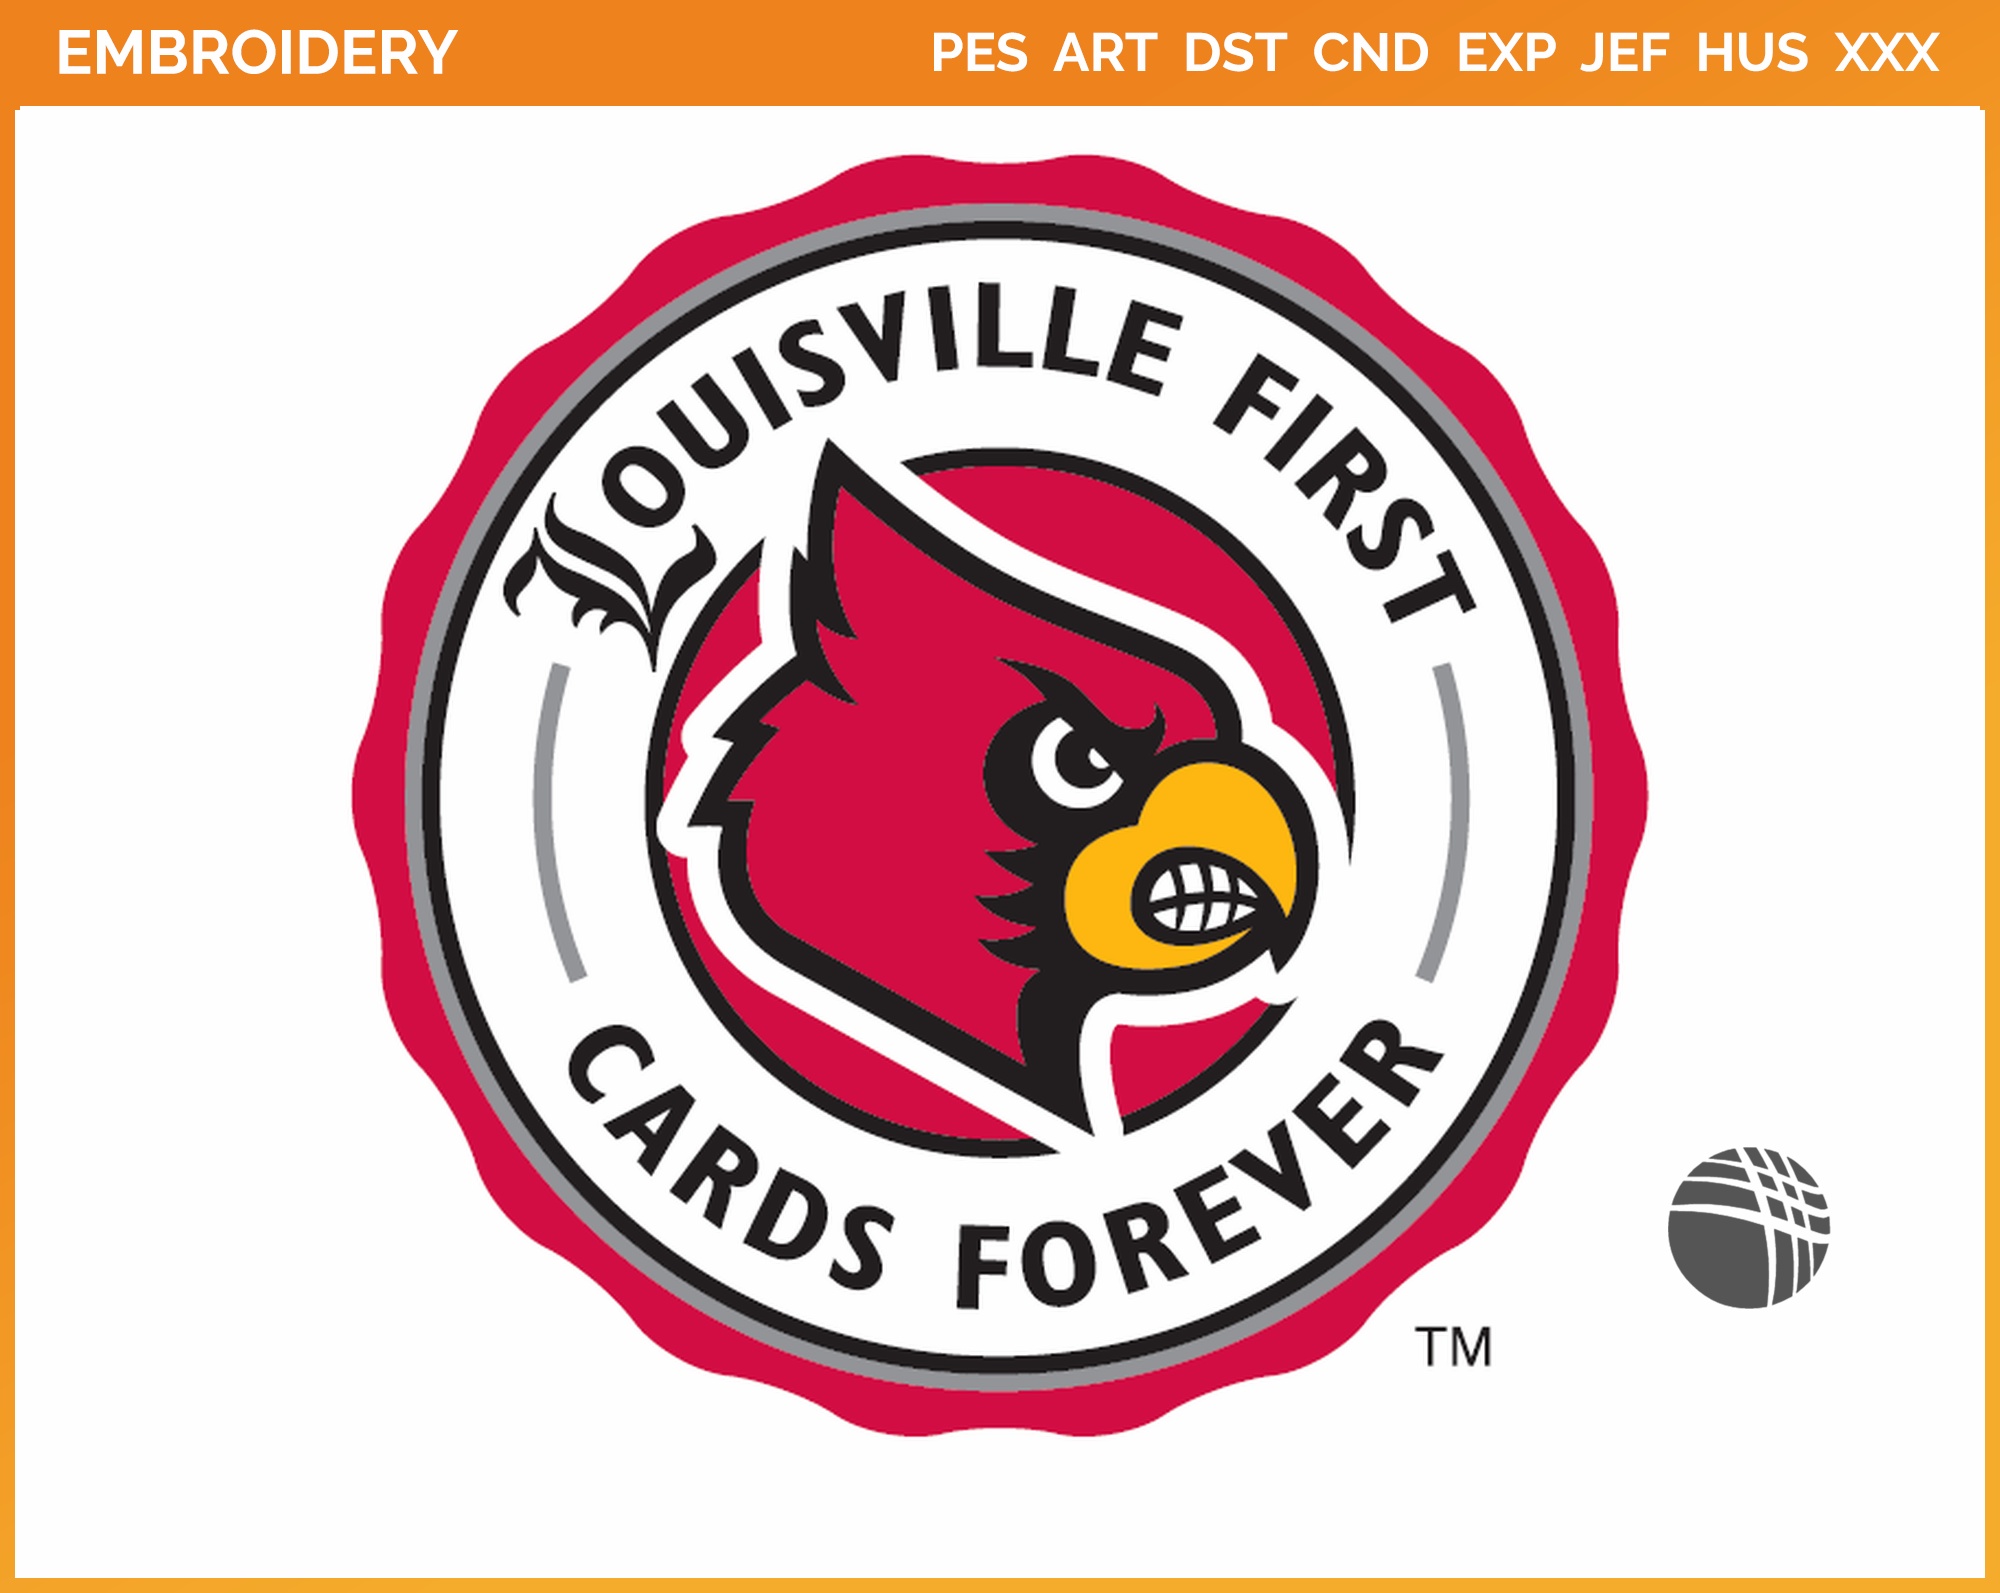 Louisville Cardinals College embroidered